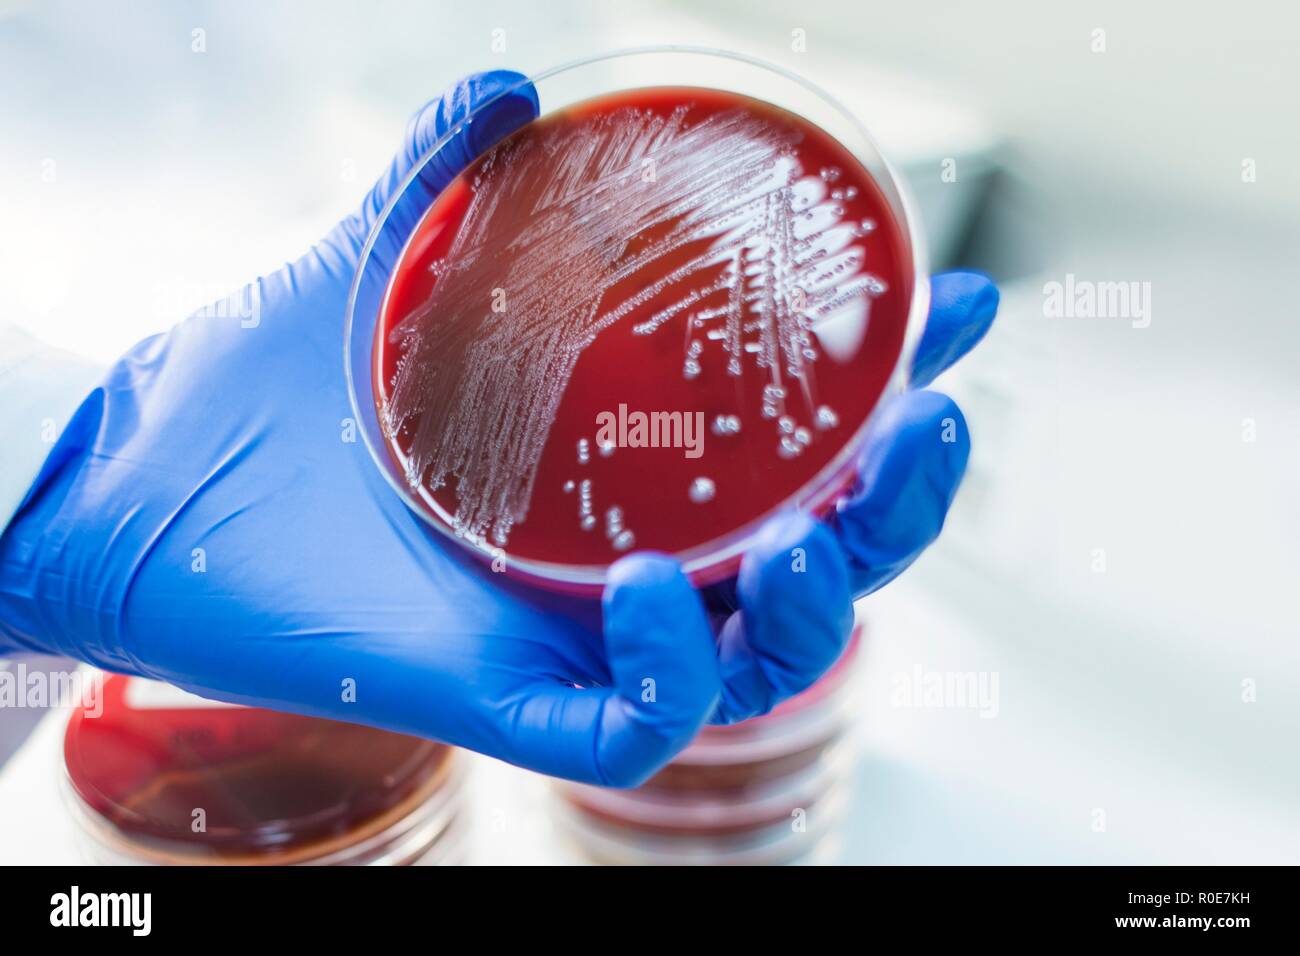 Laboratory assistant examining growth on a petri dish, close up. Stock Photo